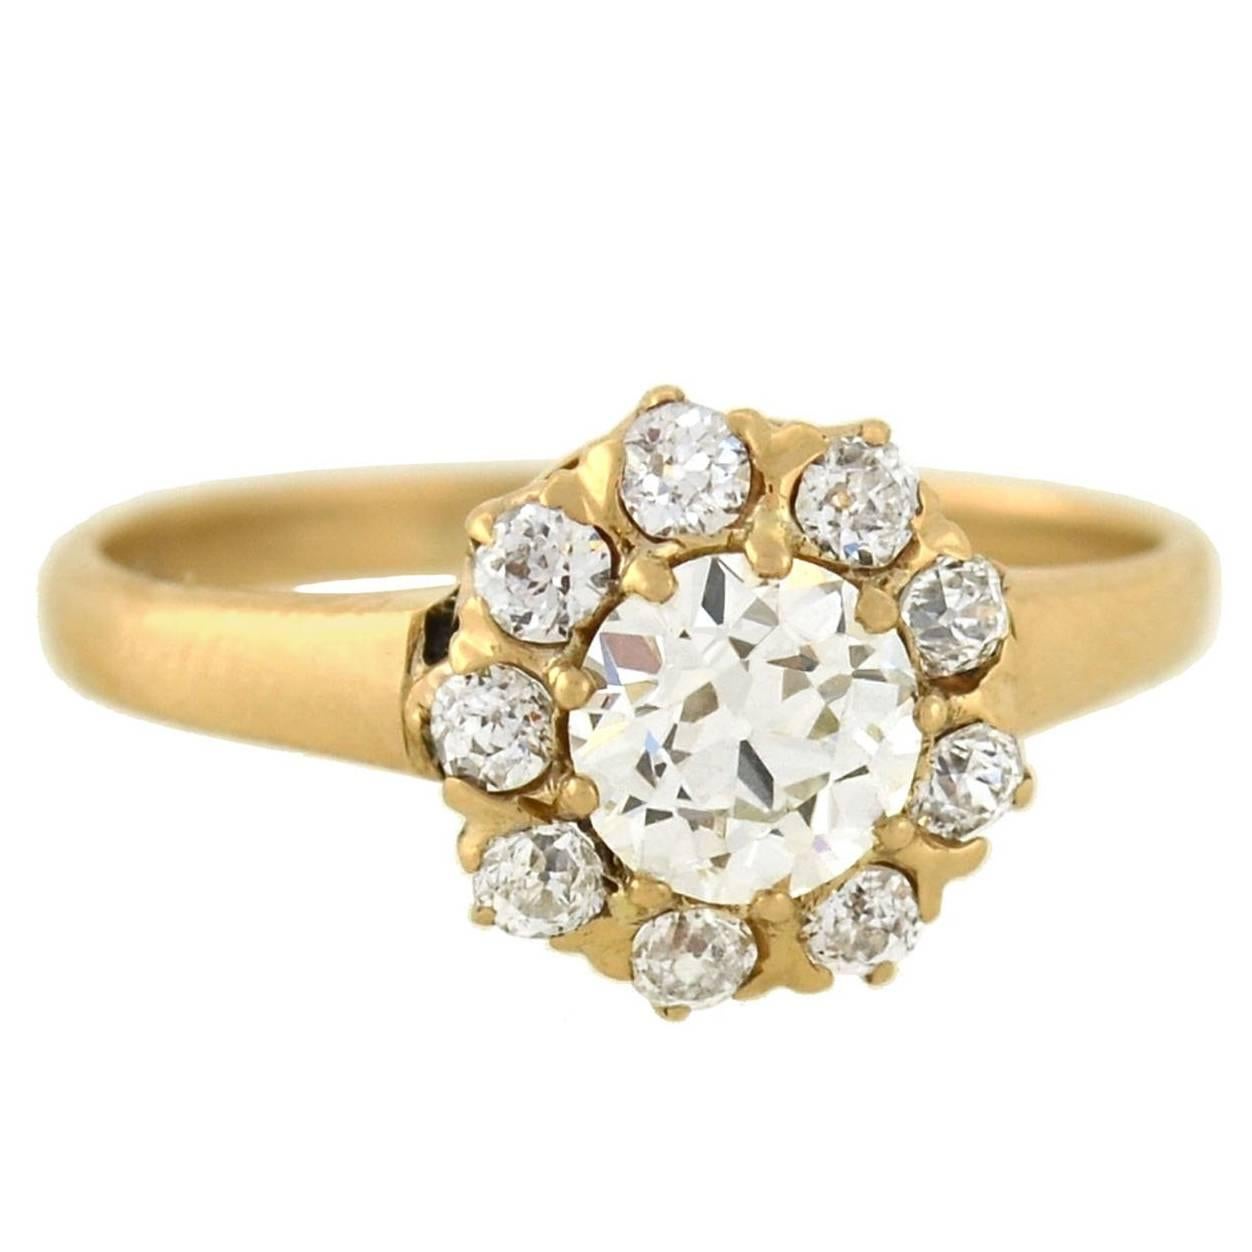 Victorian 1.05 Total Carat Diamond Cluster Engagement Ring